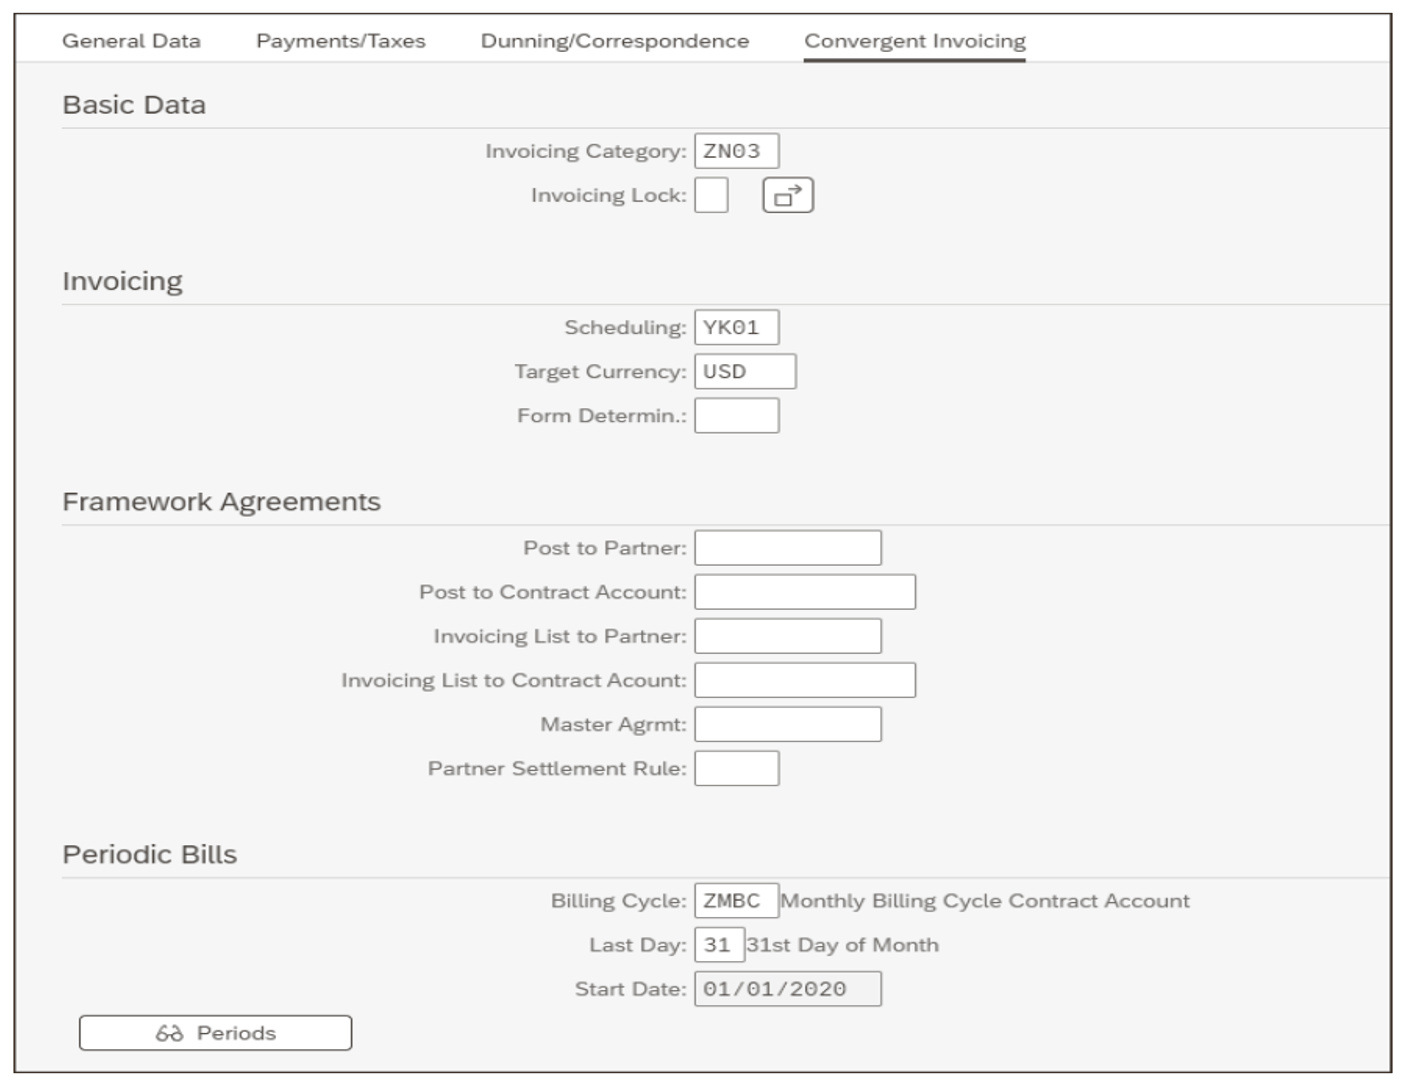 Settings Related to SAP Convergent Invoicing in Contract Accounts: McFarland Systems